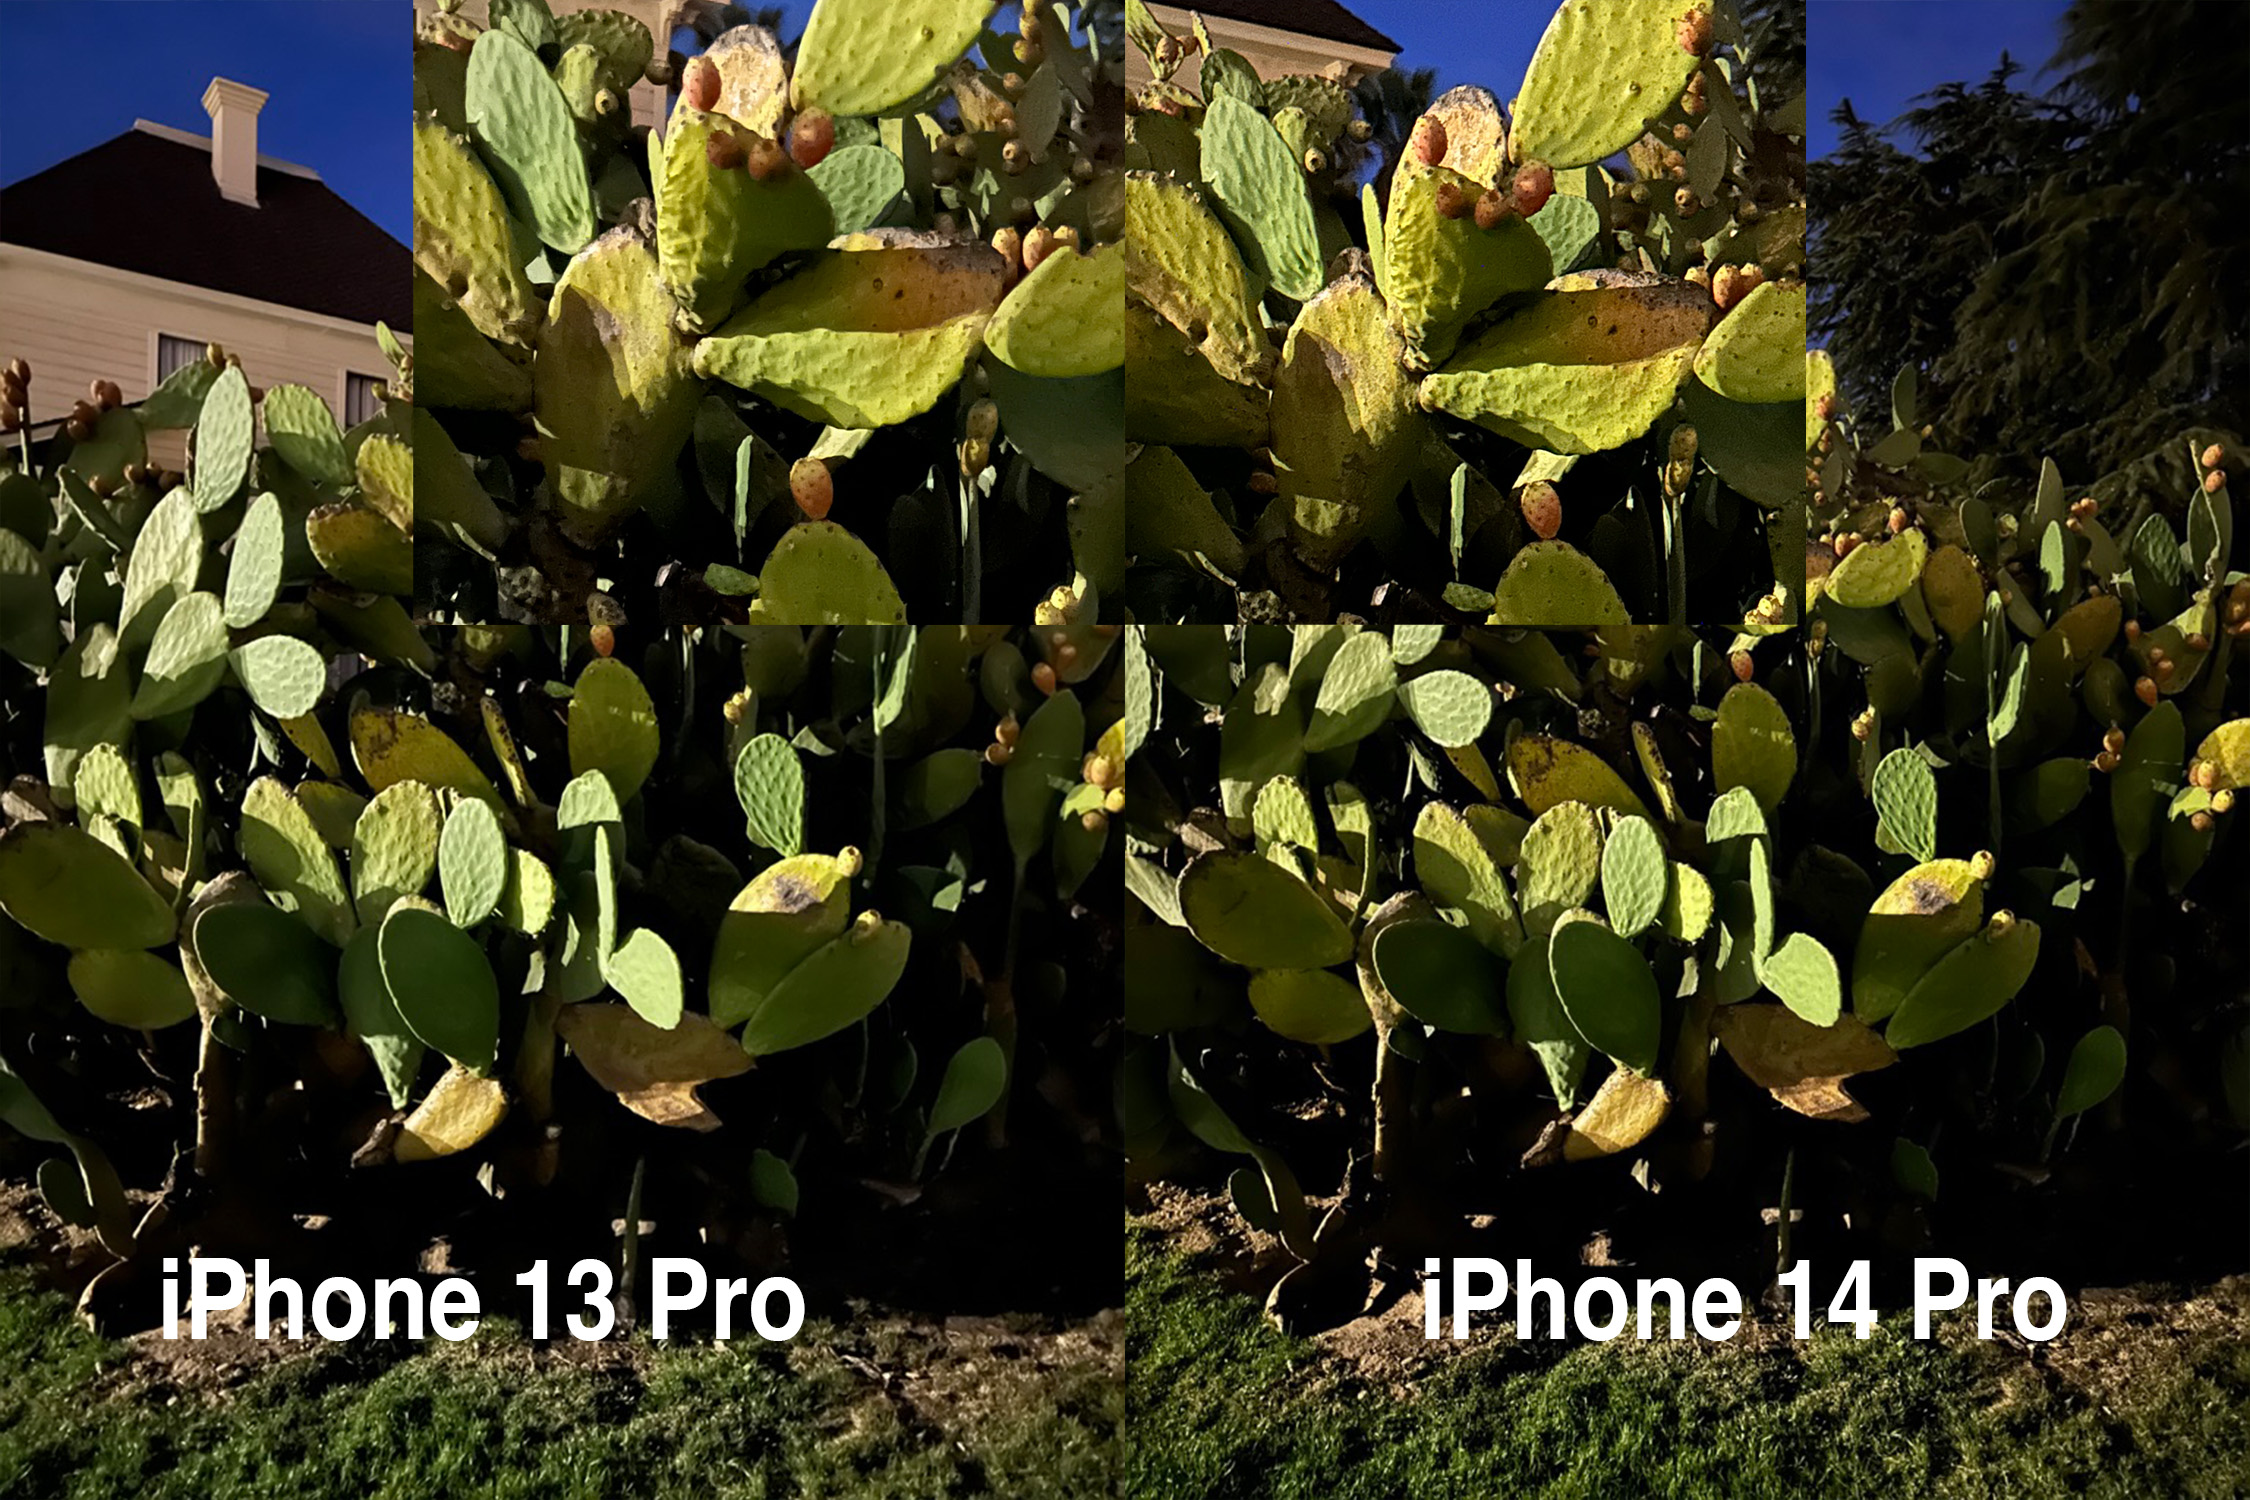 comparison photo of iPhone 13 pro and iPhone 14 pro night mode detail